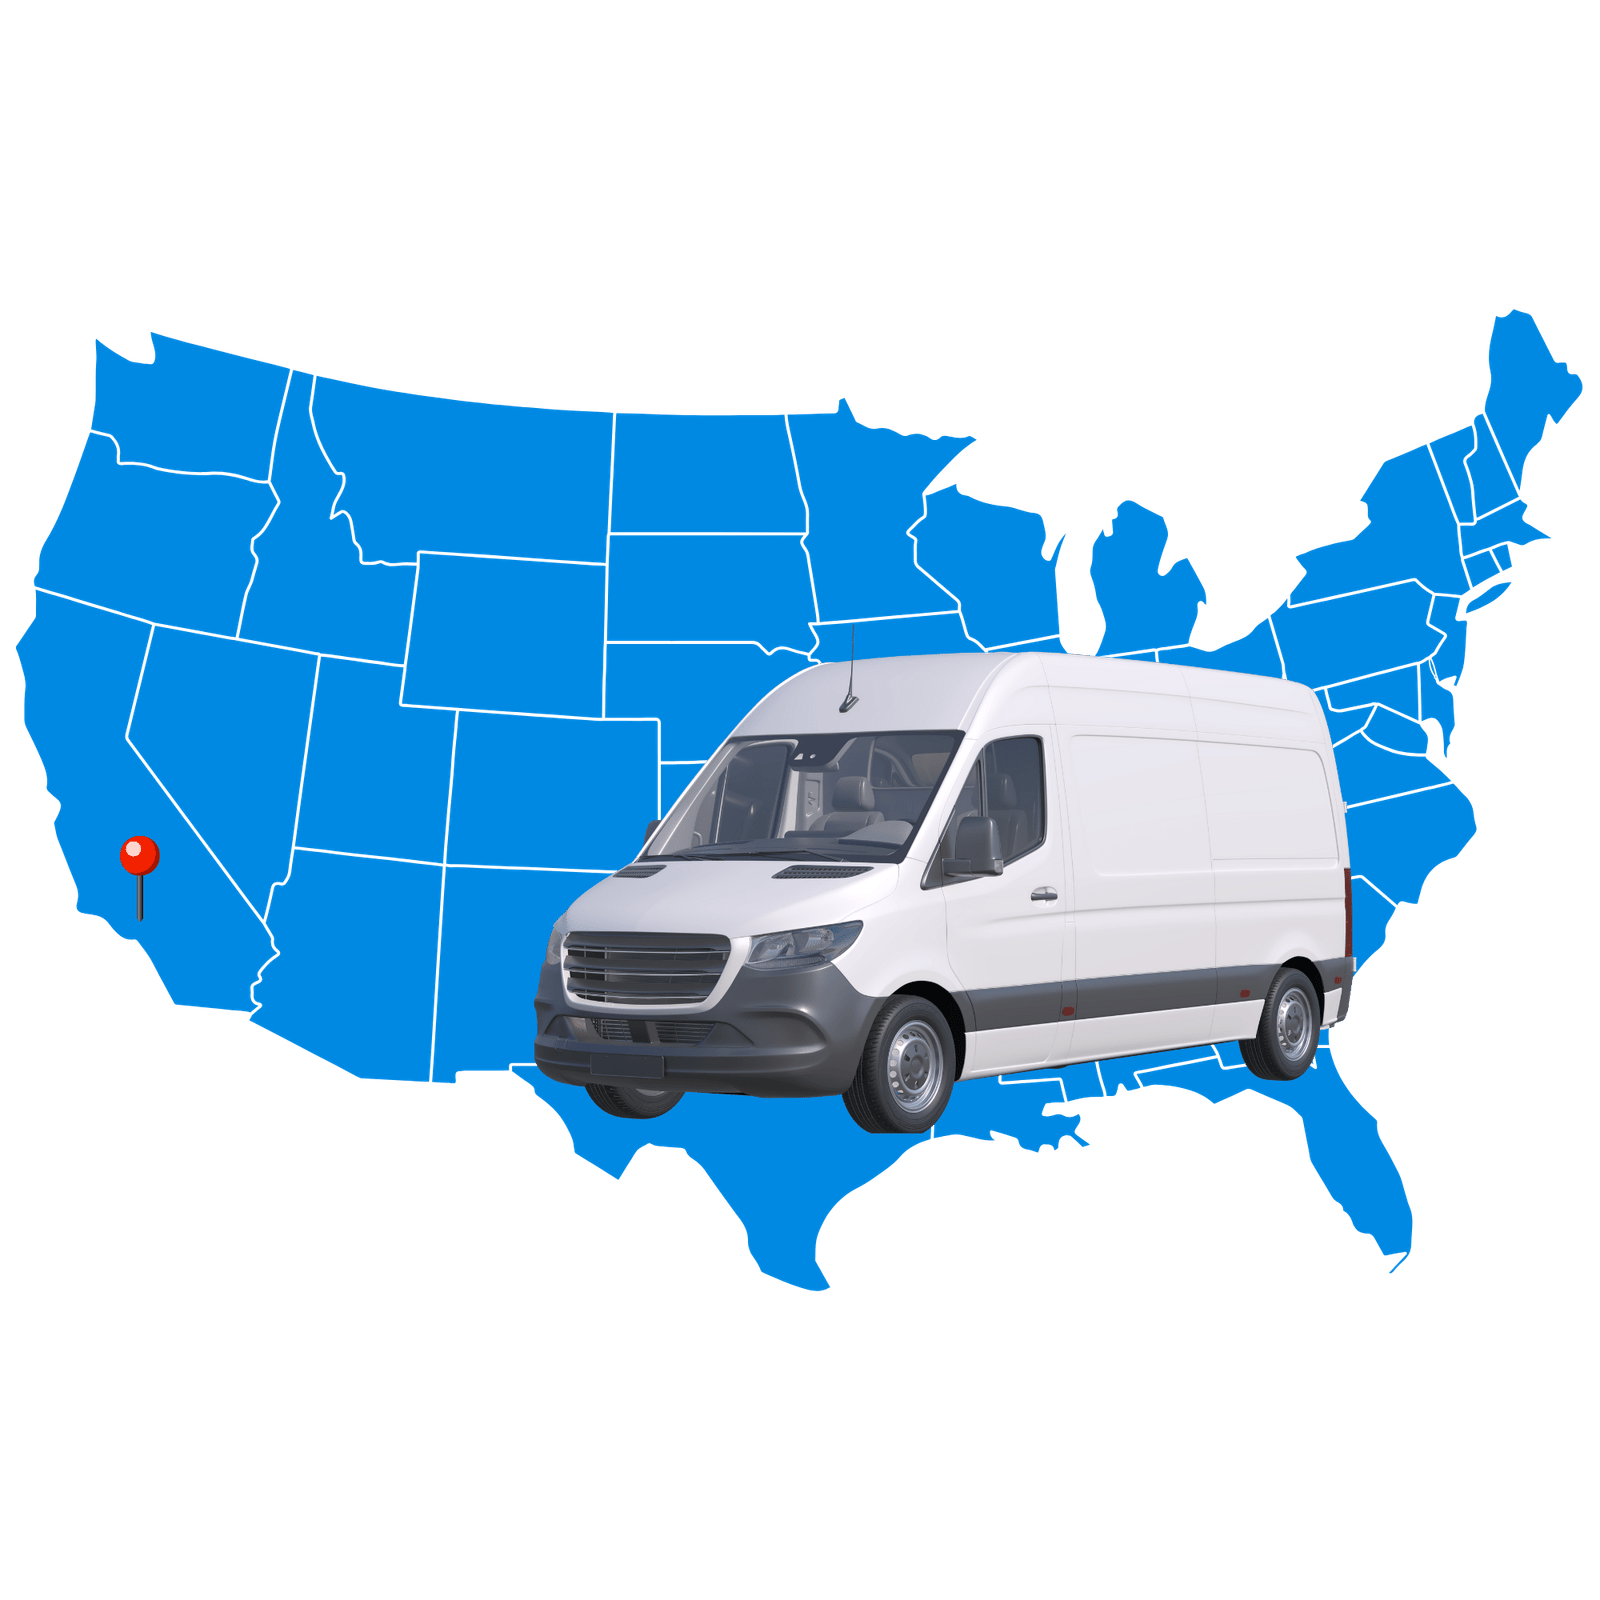 An illustration featuring a map of the USA with a Sprinter van and a ping highlighting Los Angeles, indicating our primary location and delivery operations base.